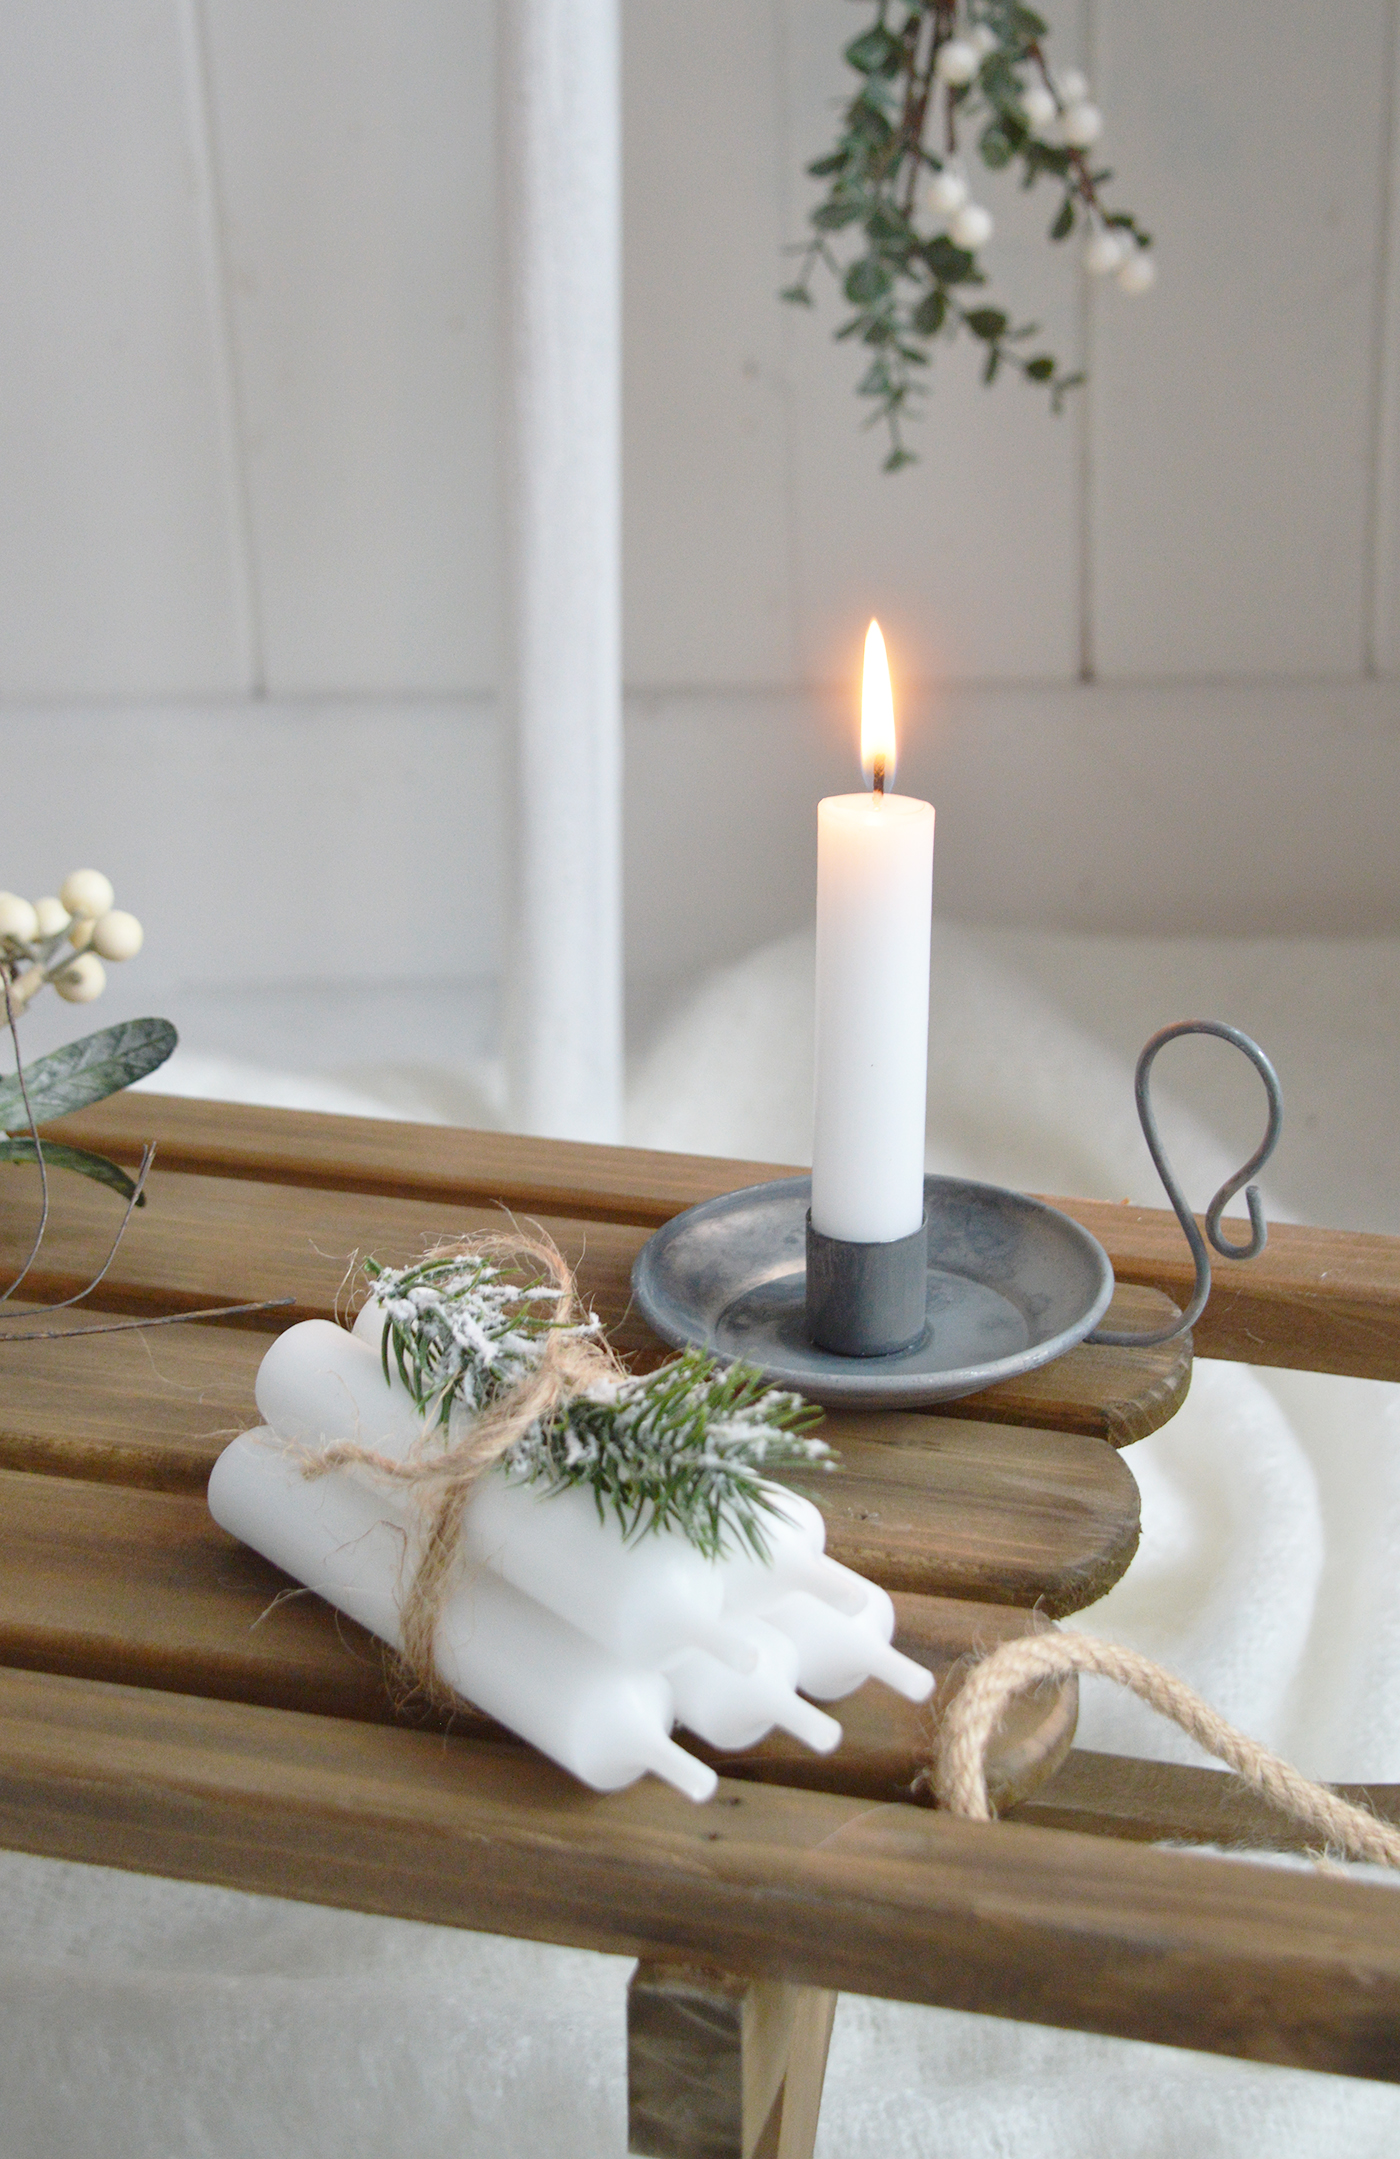 A Christmas styles candle - chamber stick with white candle and bundle